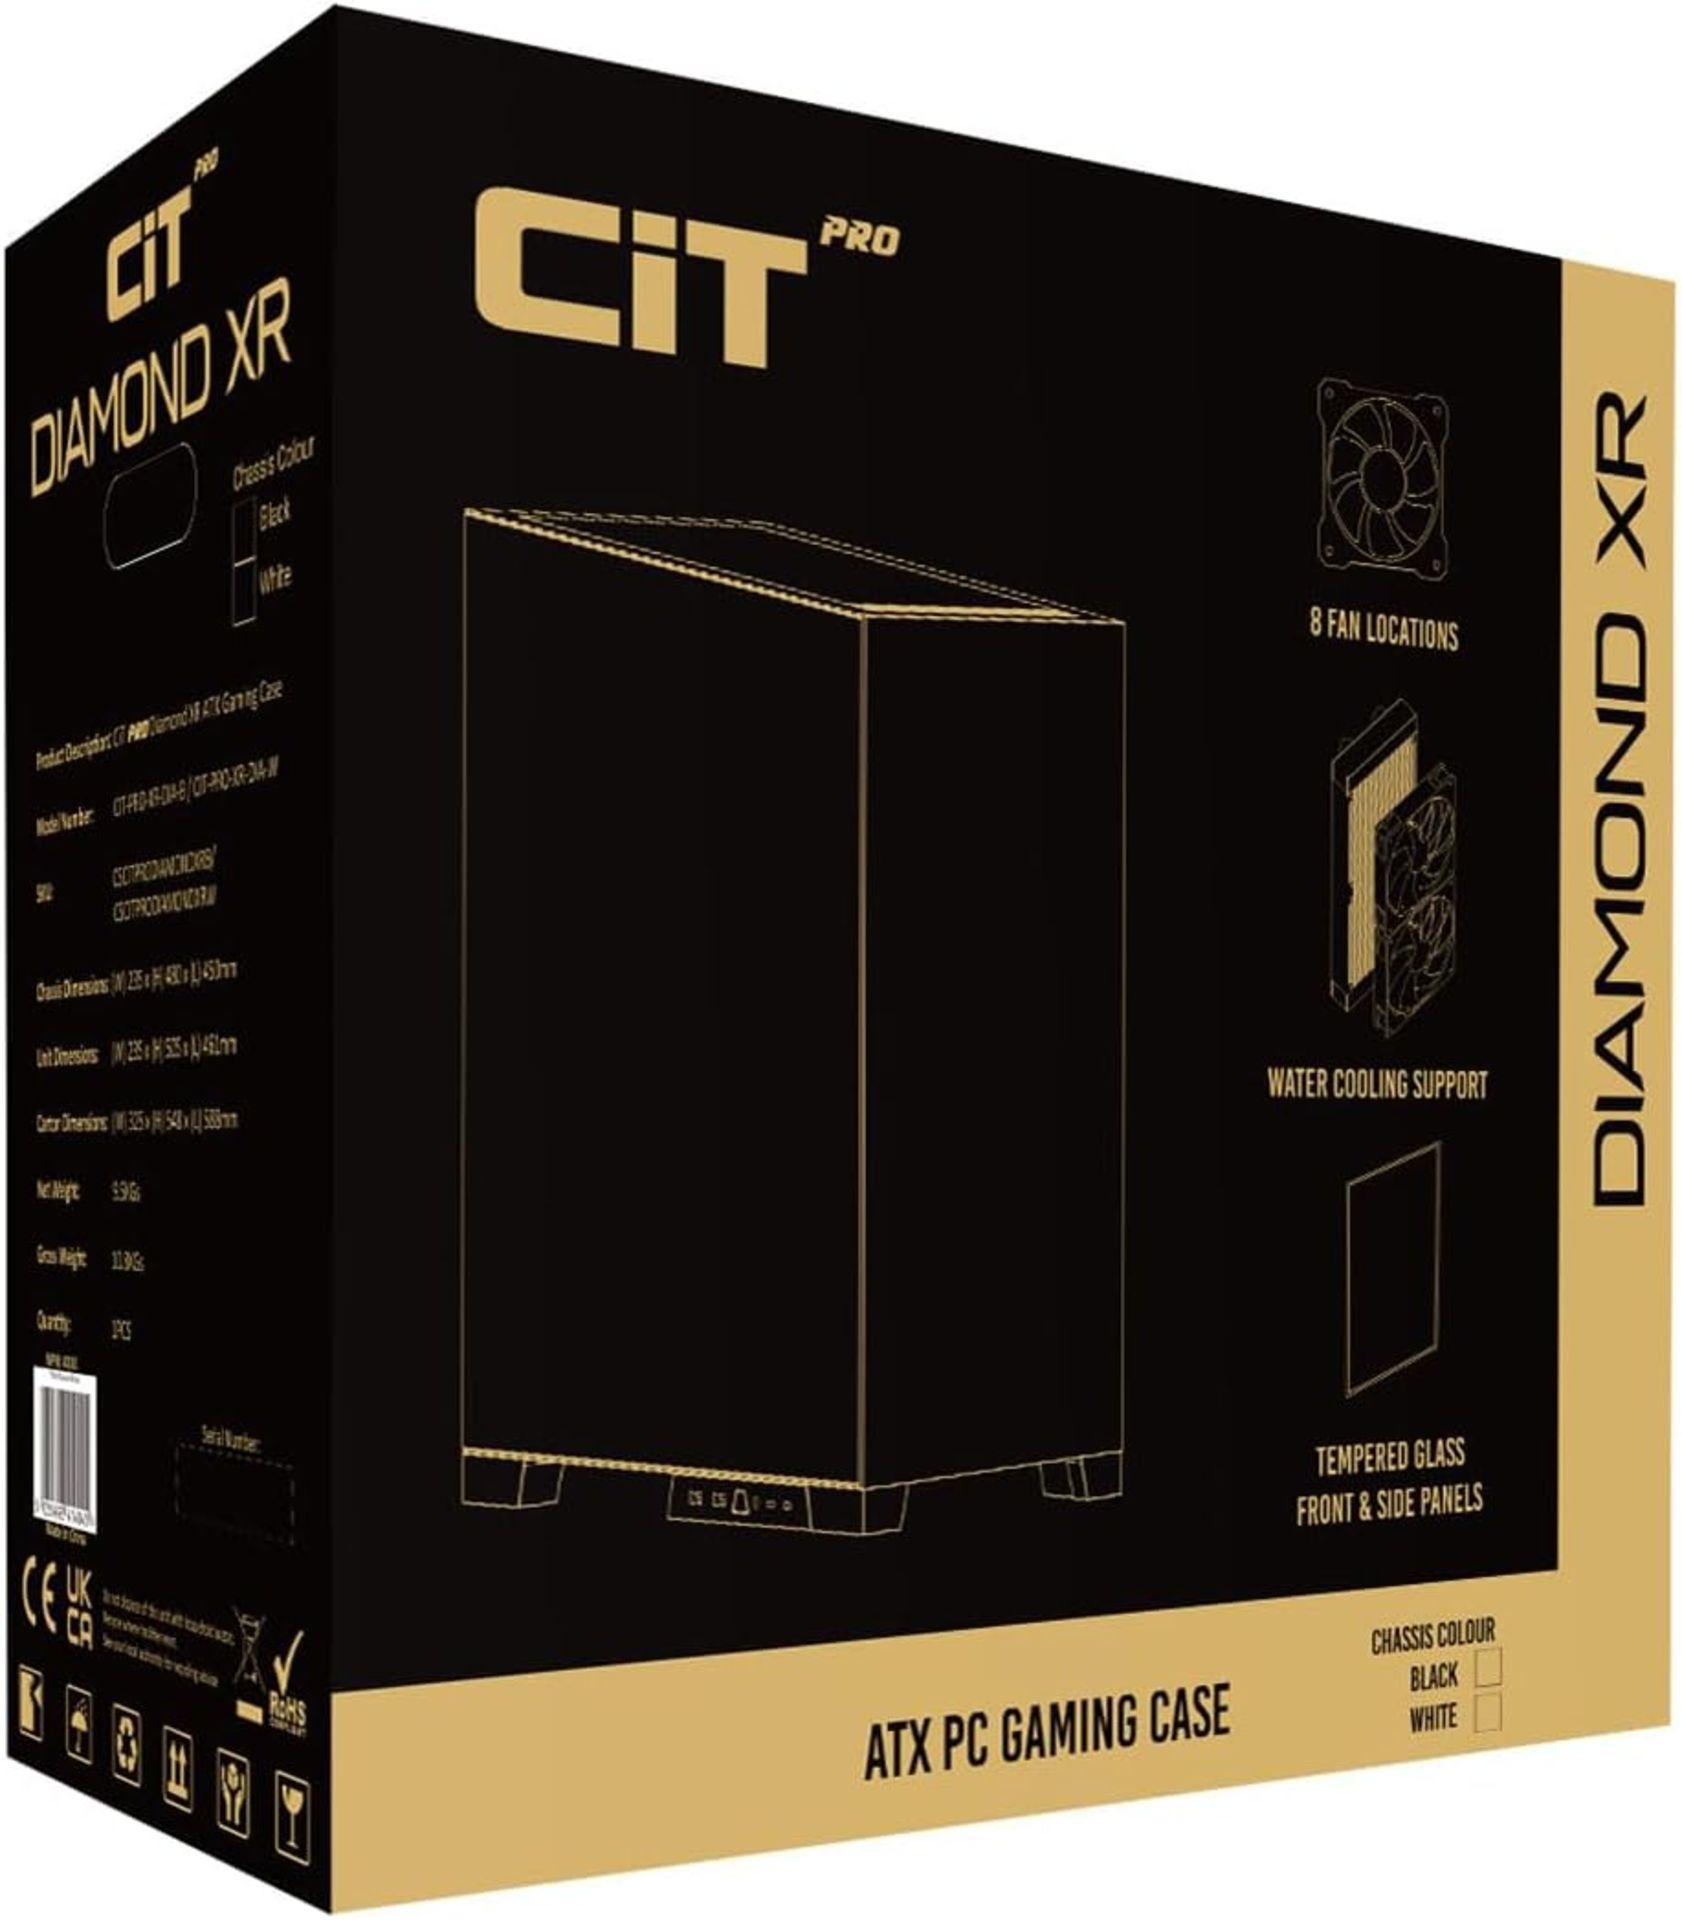 NEW & BOXED CIT Diamond XR Mid Tower PC Case With 7 Fans - WHITE. RRP £99.99. If you want a sharp- - Image 9 of 9